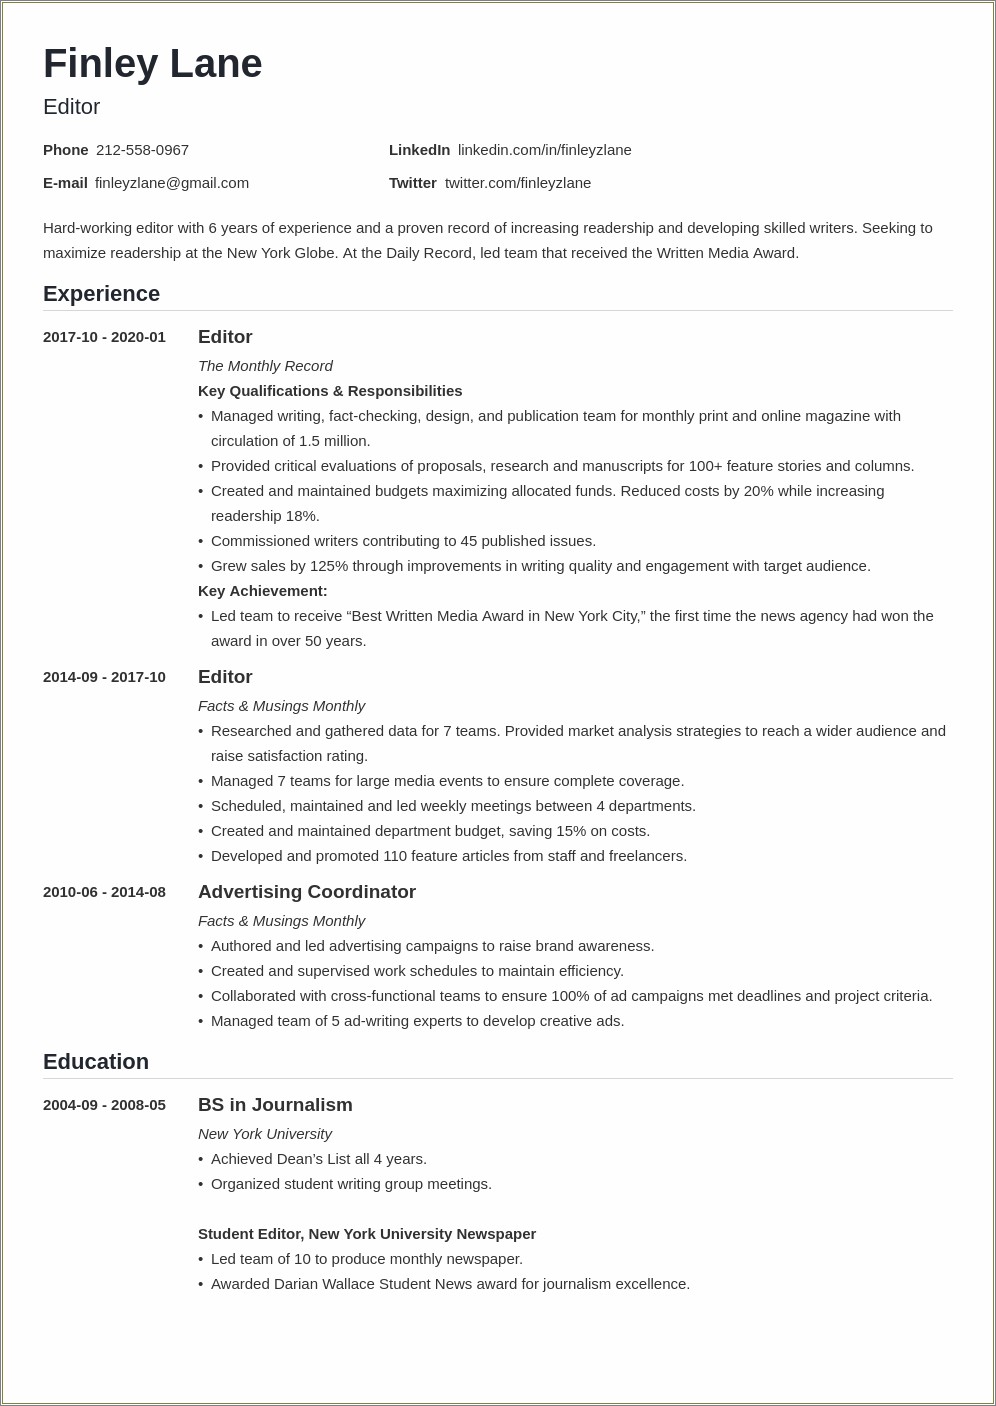 Chicago Manual Of Style Resume Managing Editor